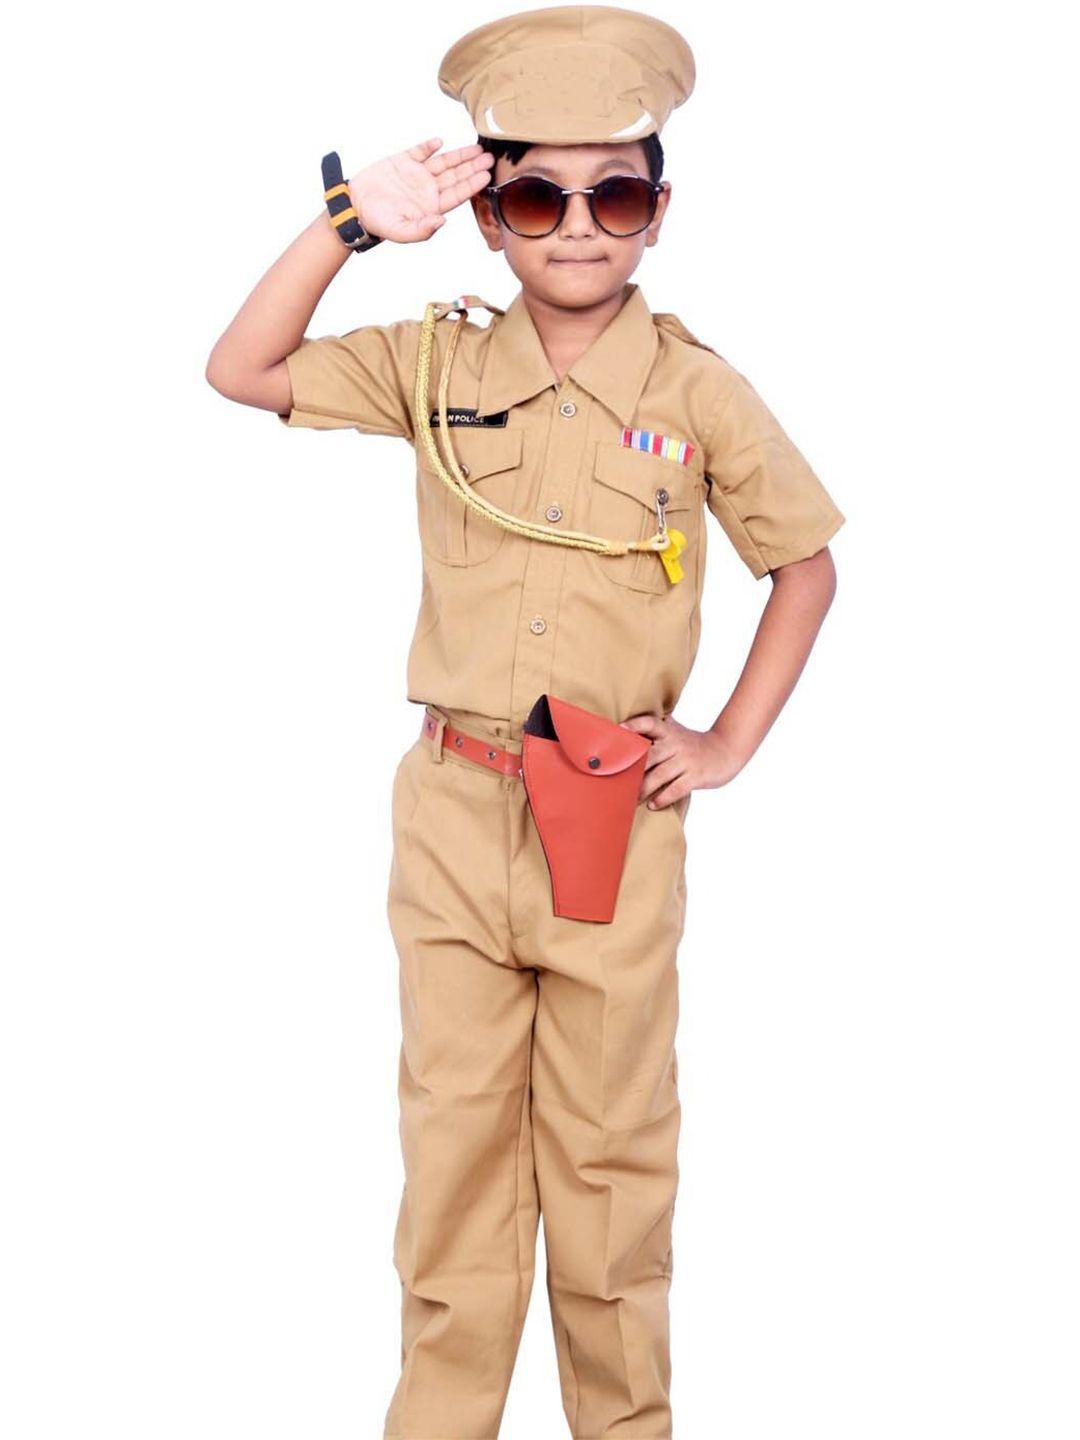 BAESD Kids Shirt with Trousers Police Costume Clothing Set